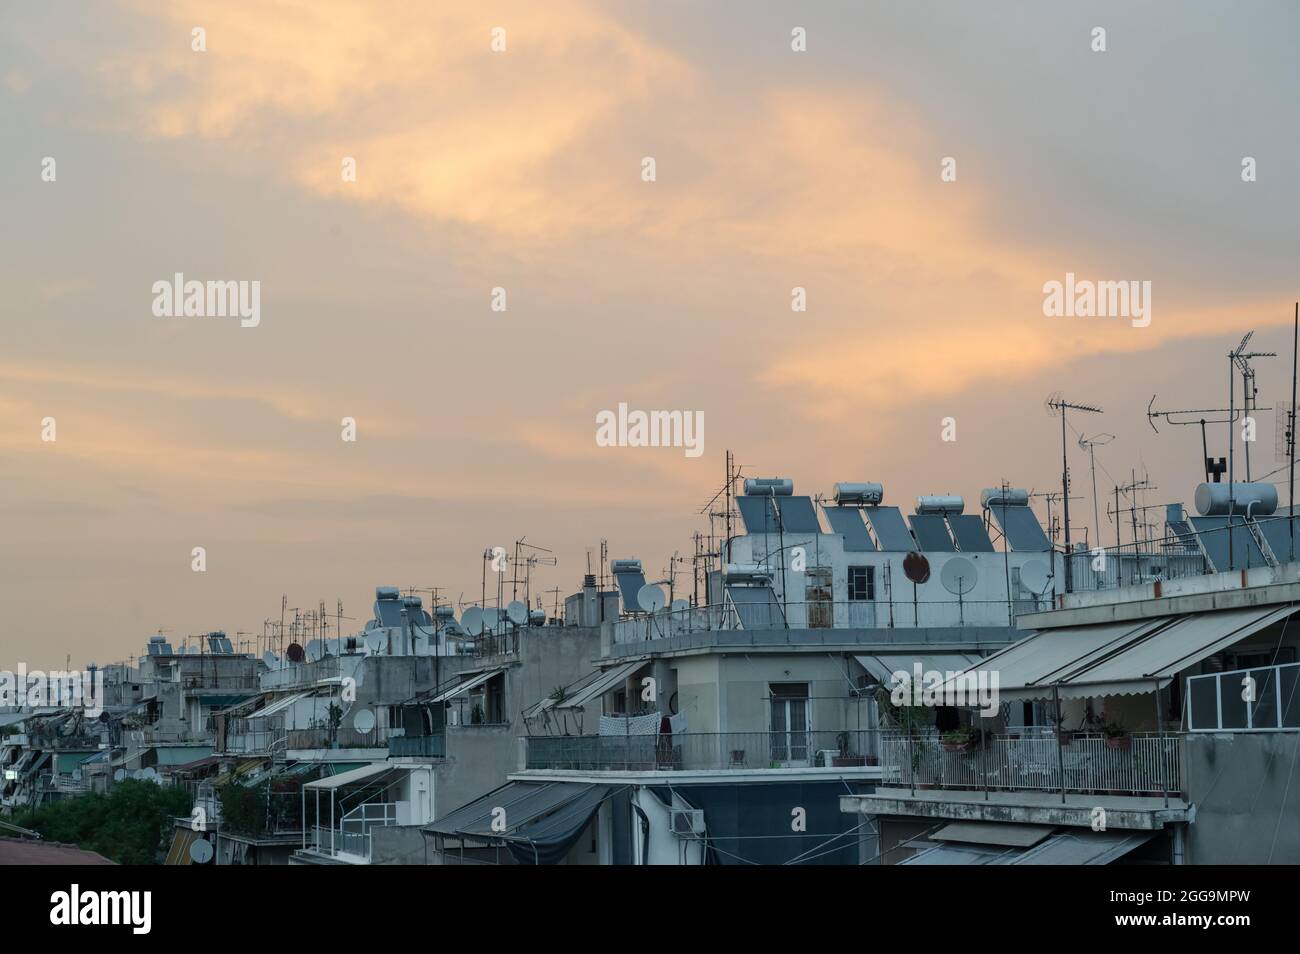 Cityscape of residential area in Athens at evening twilights. Urban architecture. Solar panels and satellite dishes on the roof. Stock Photo